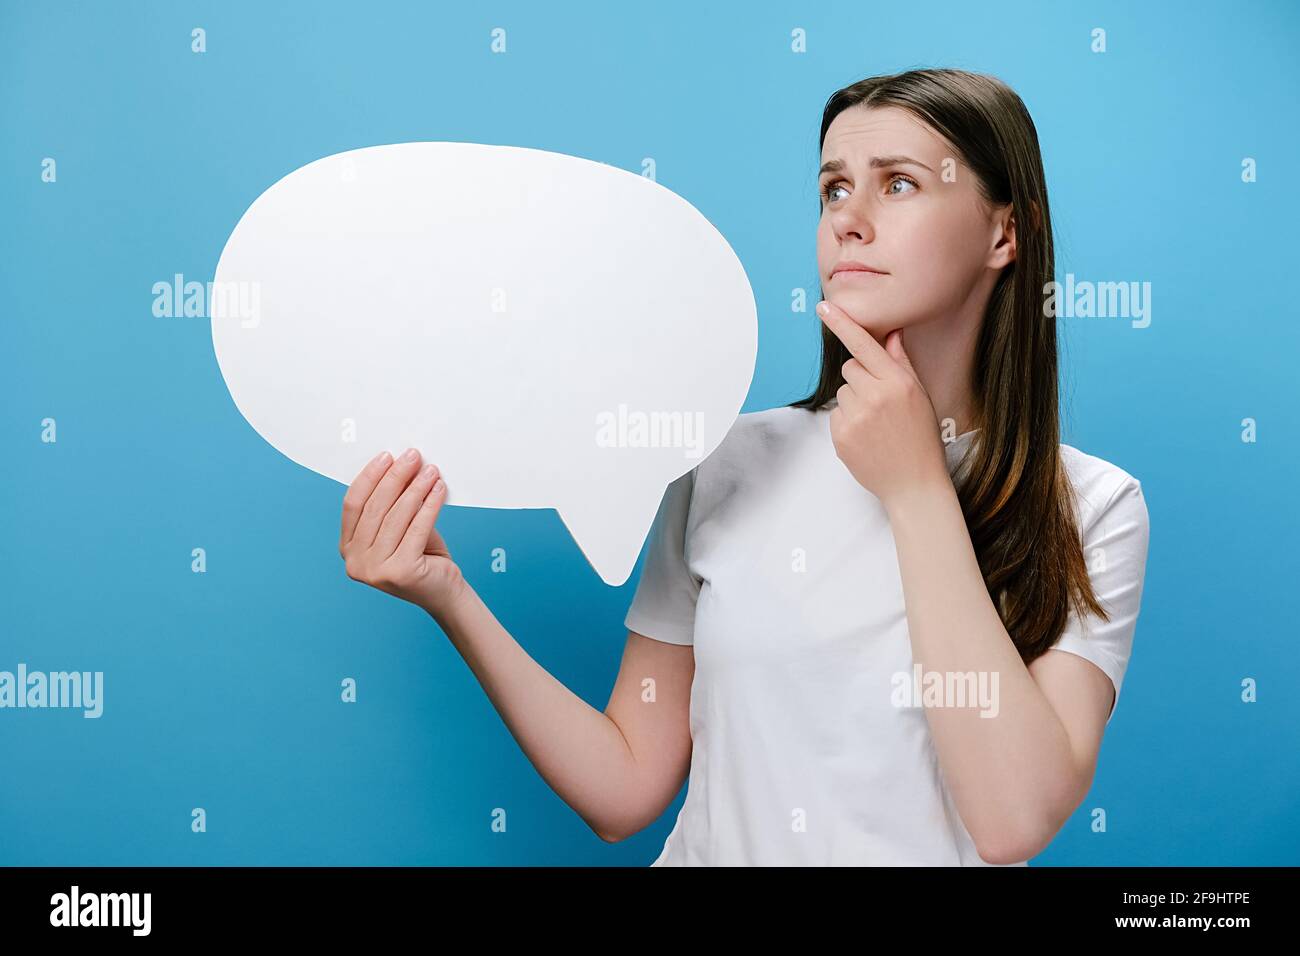 Worried pensive confused young female holding empty speech bubble, spreading arms put hand prop up on chin, dressed in white t-shirt Stock Photo